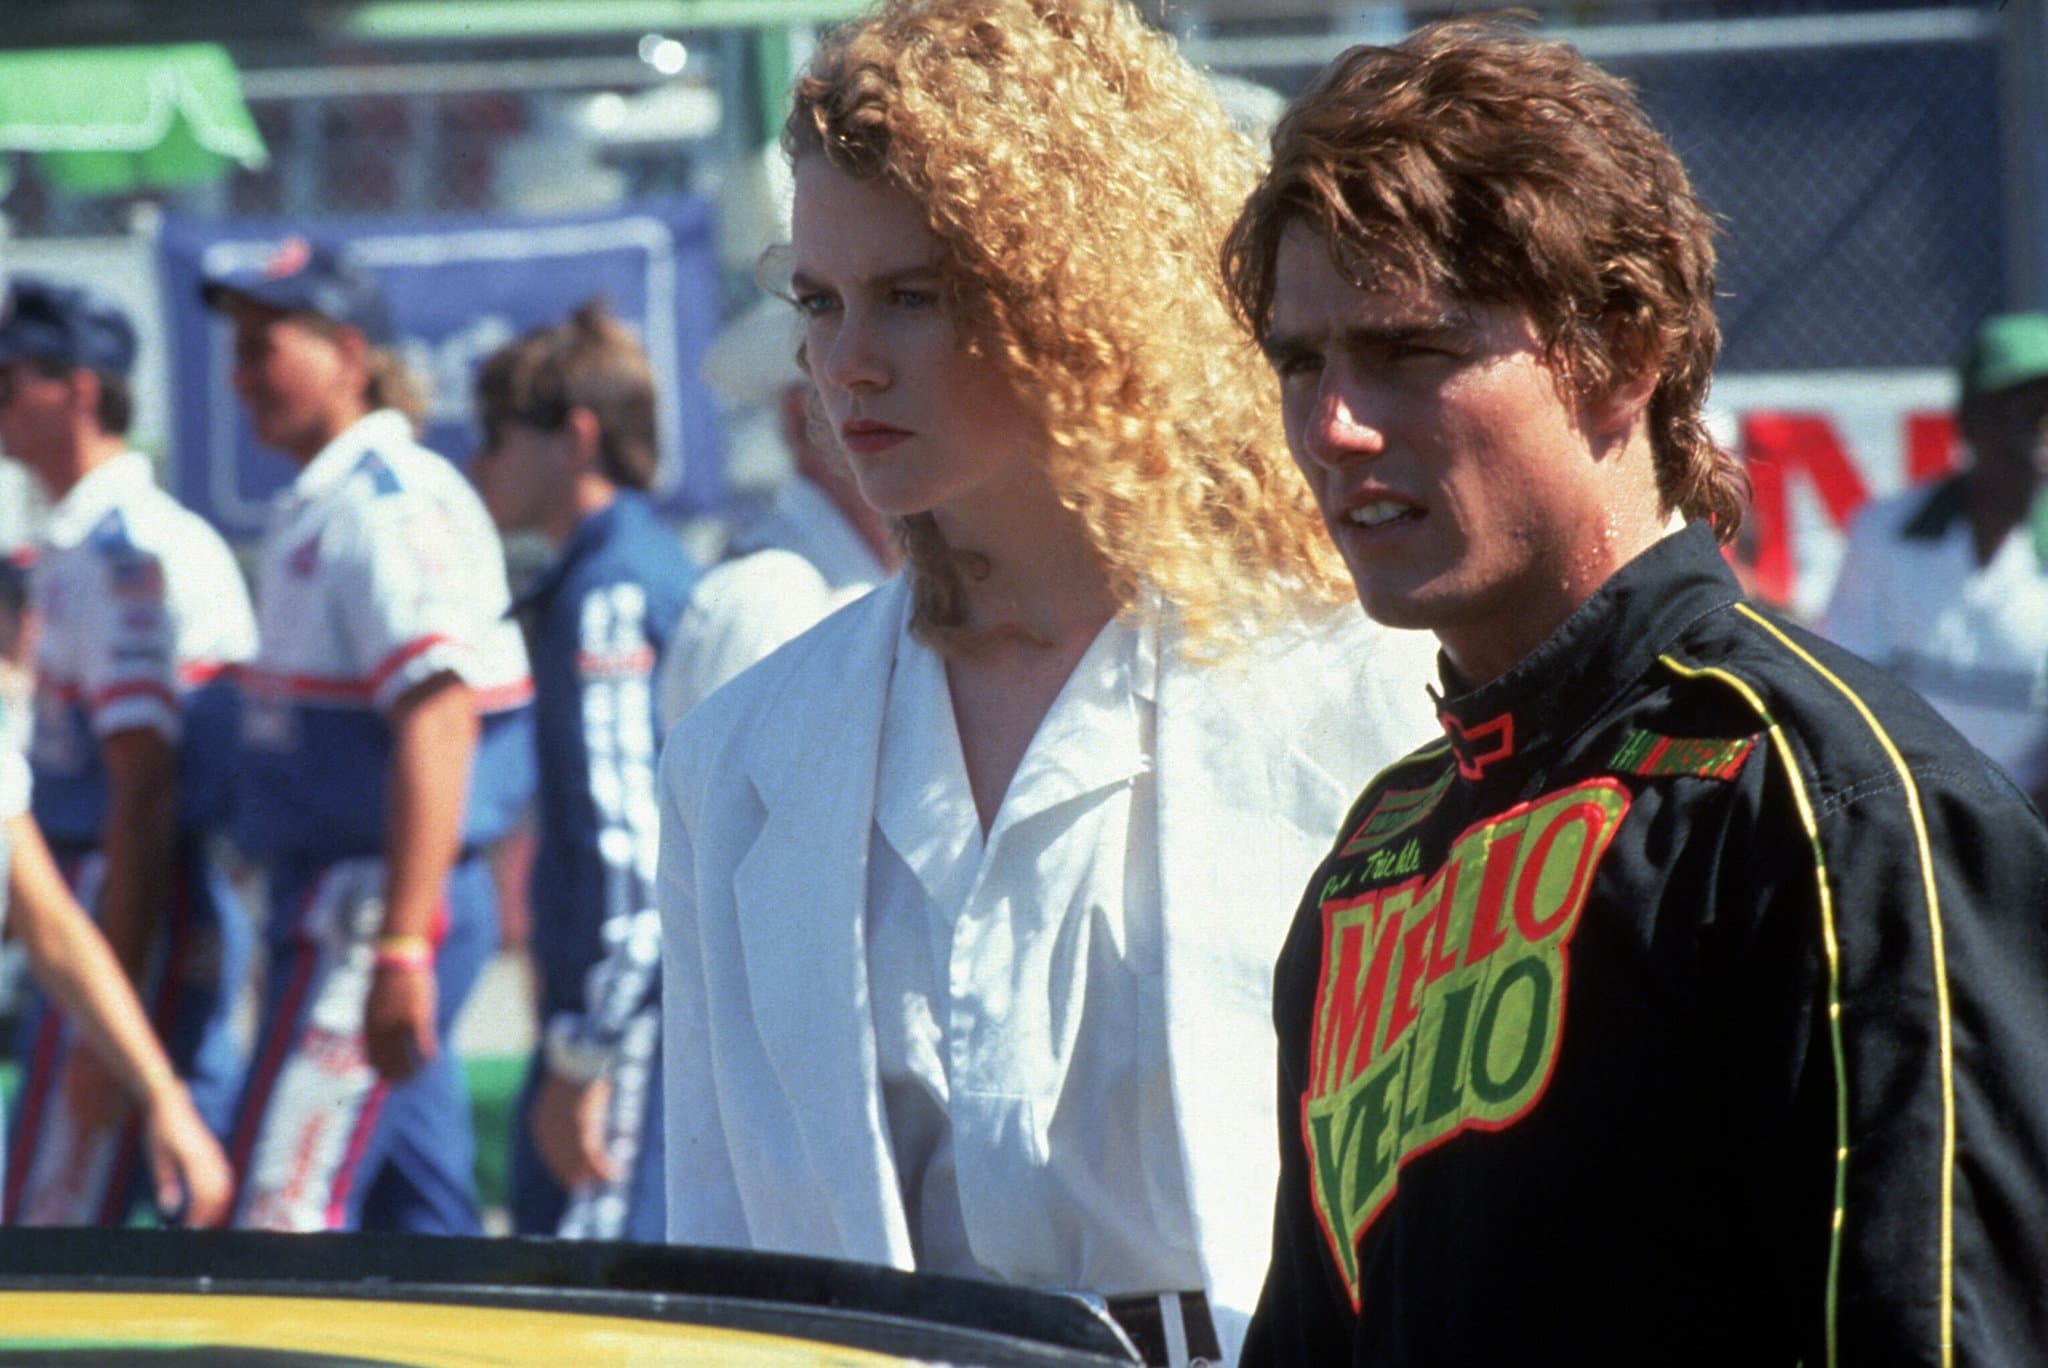 Tom Cruise and his ex-wife Nicole Kidman met on the set of Days of Thunder in 1989